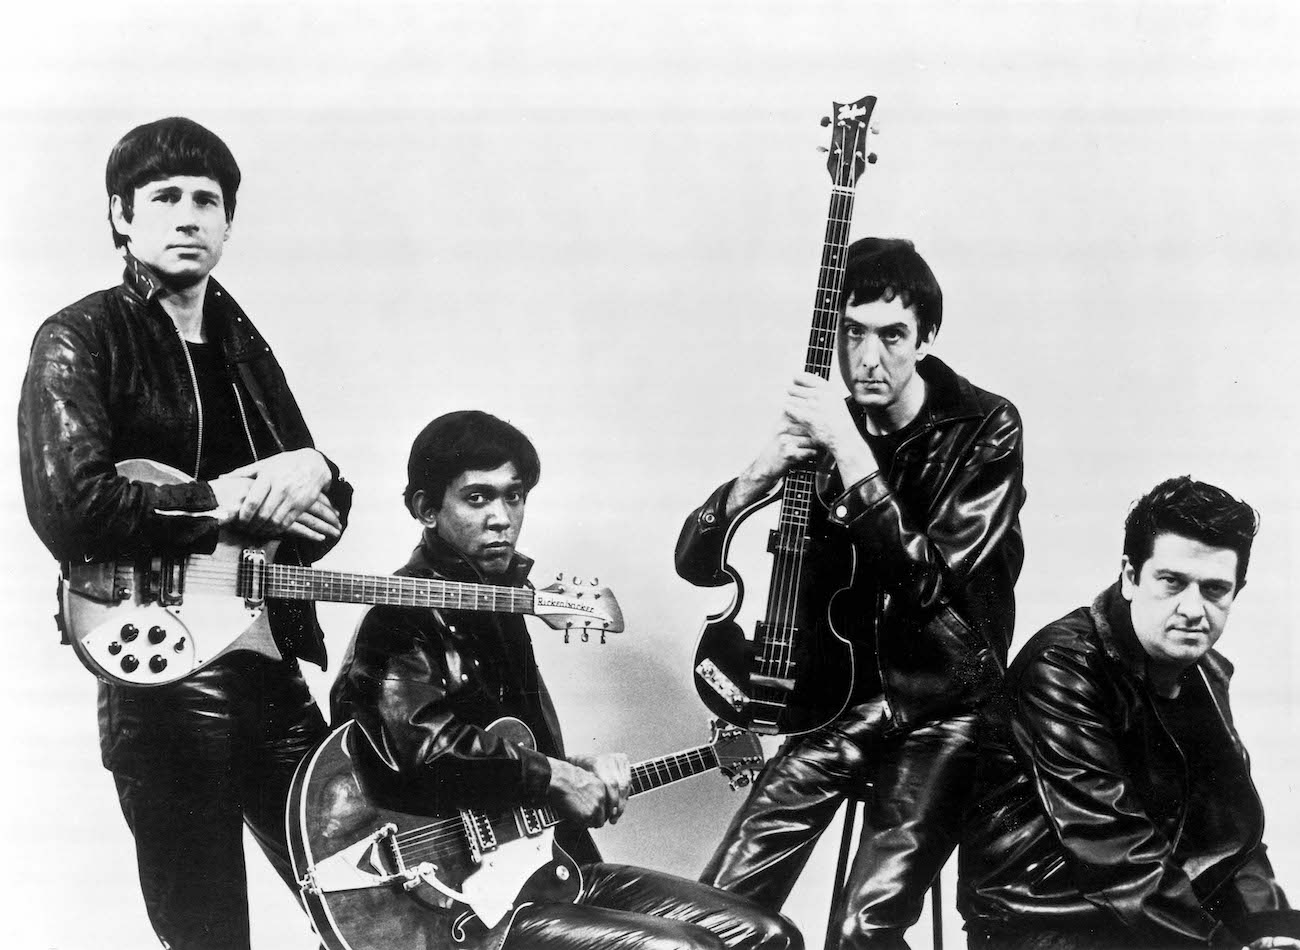 The Rutles pose in leather jackets in 1978.